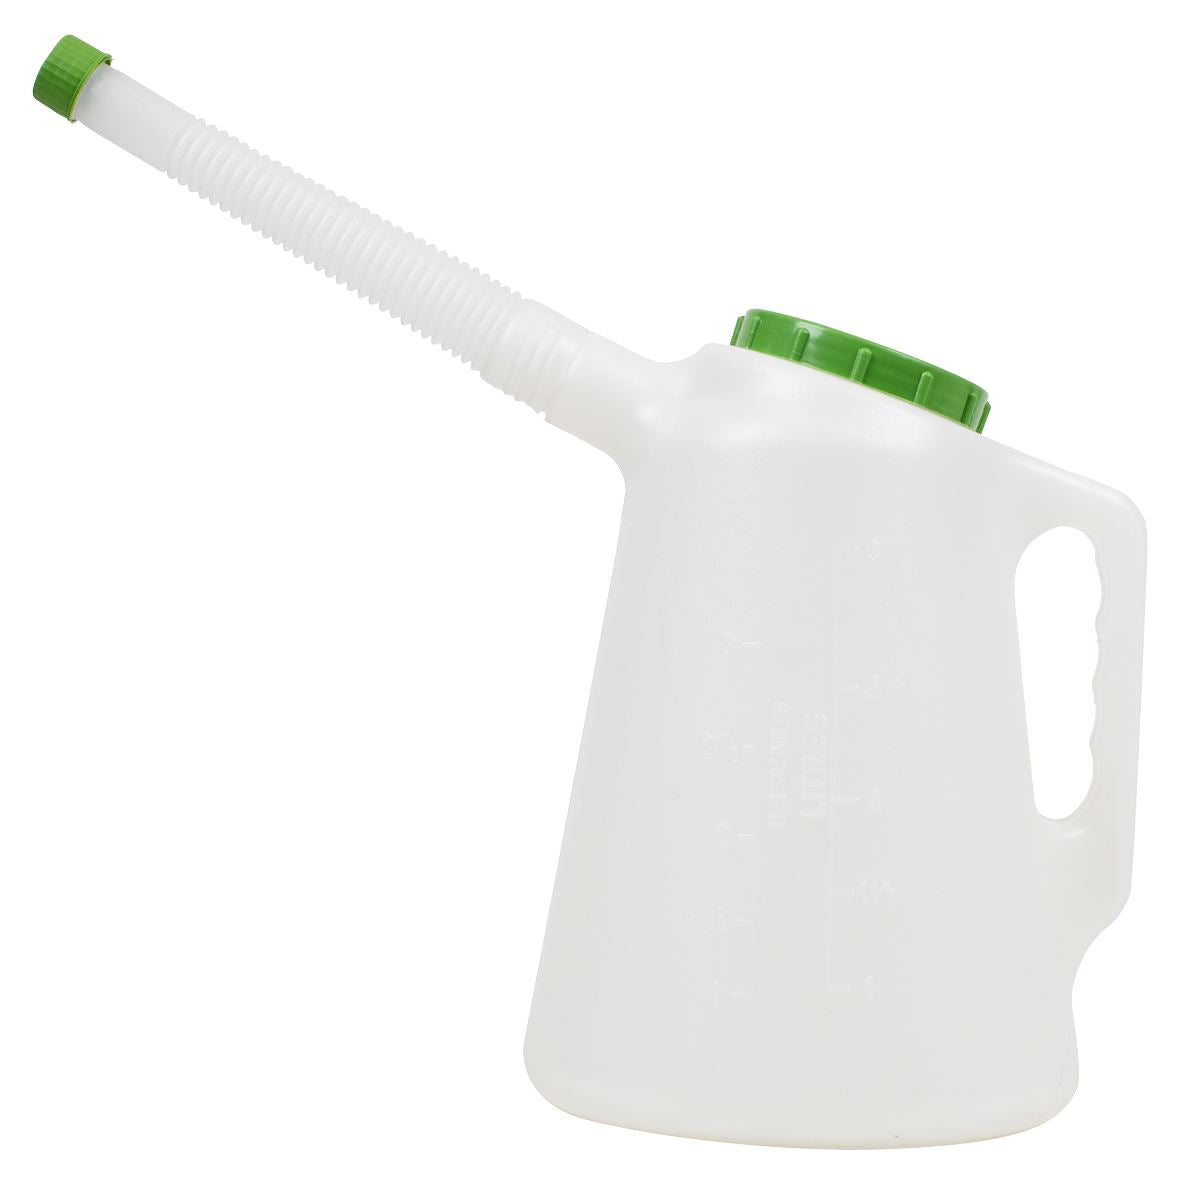 Sealey Oil Container with Flexible Spout 3L - Green Lid